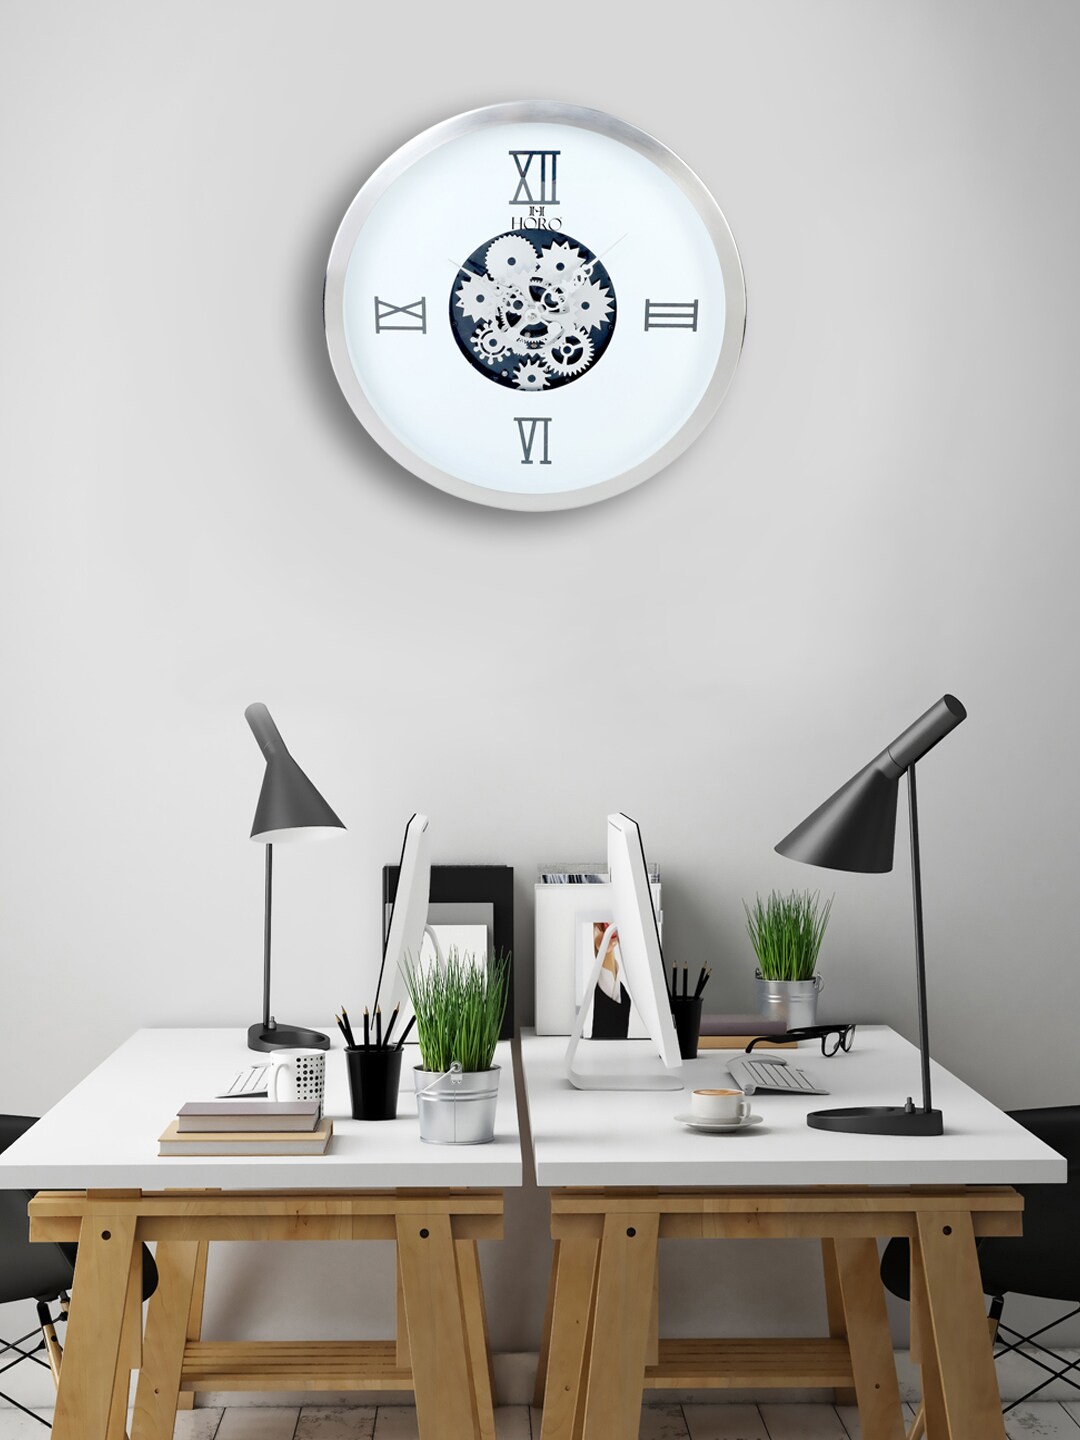 Horo White Handcrafted Geometric Solid 36 cm Analogue Wall Clock Price in India